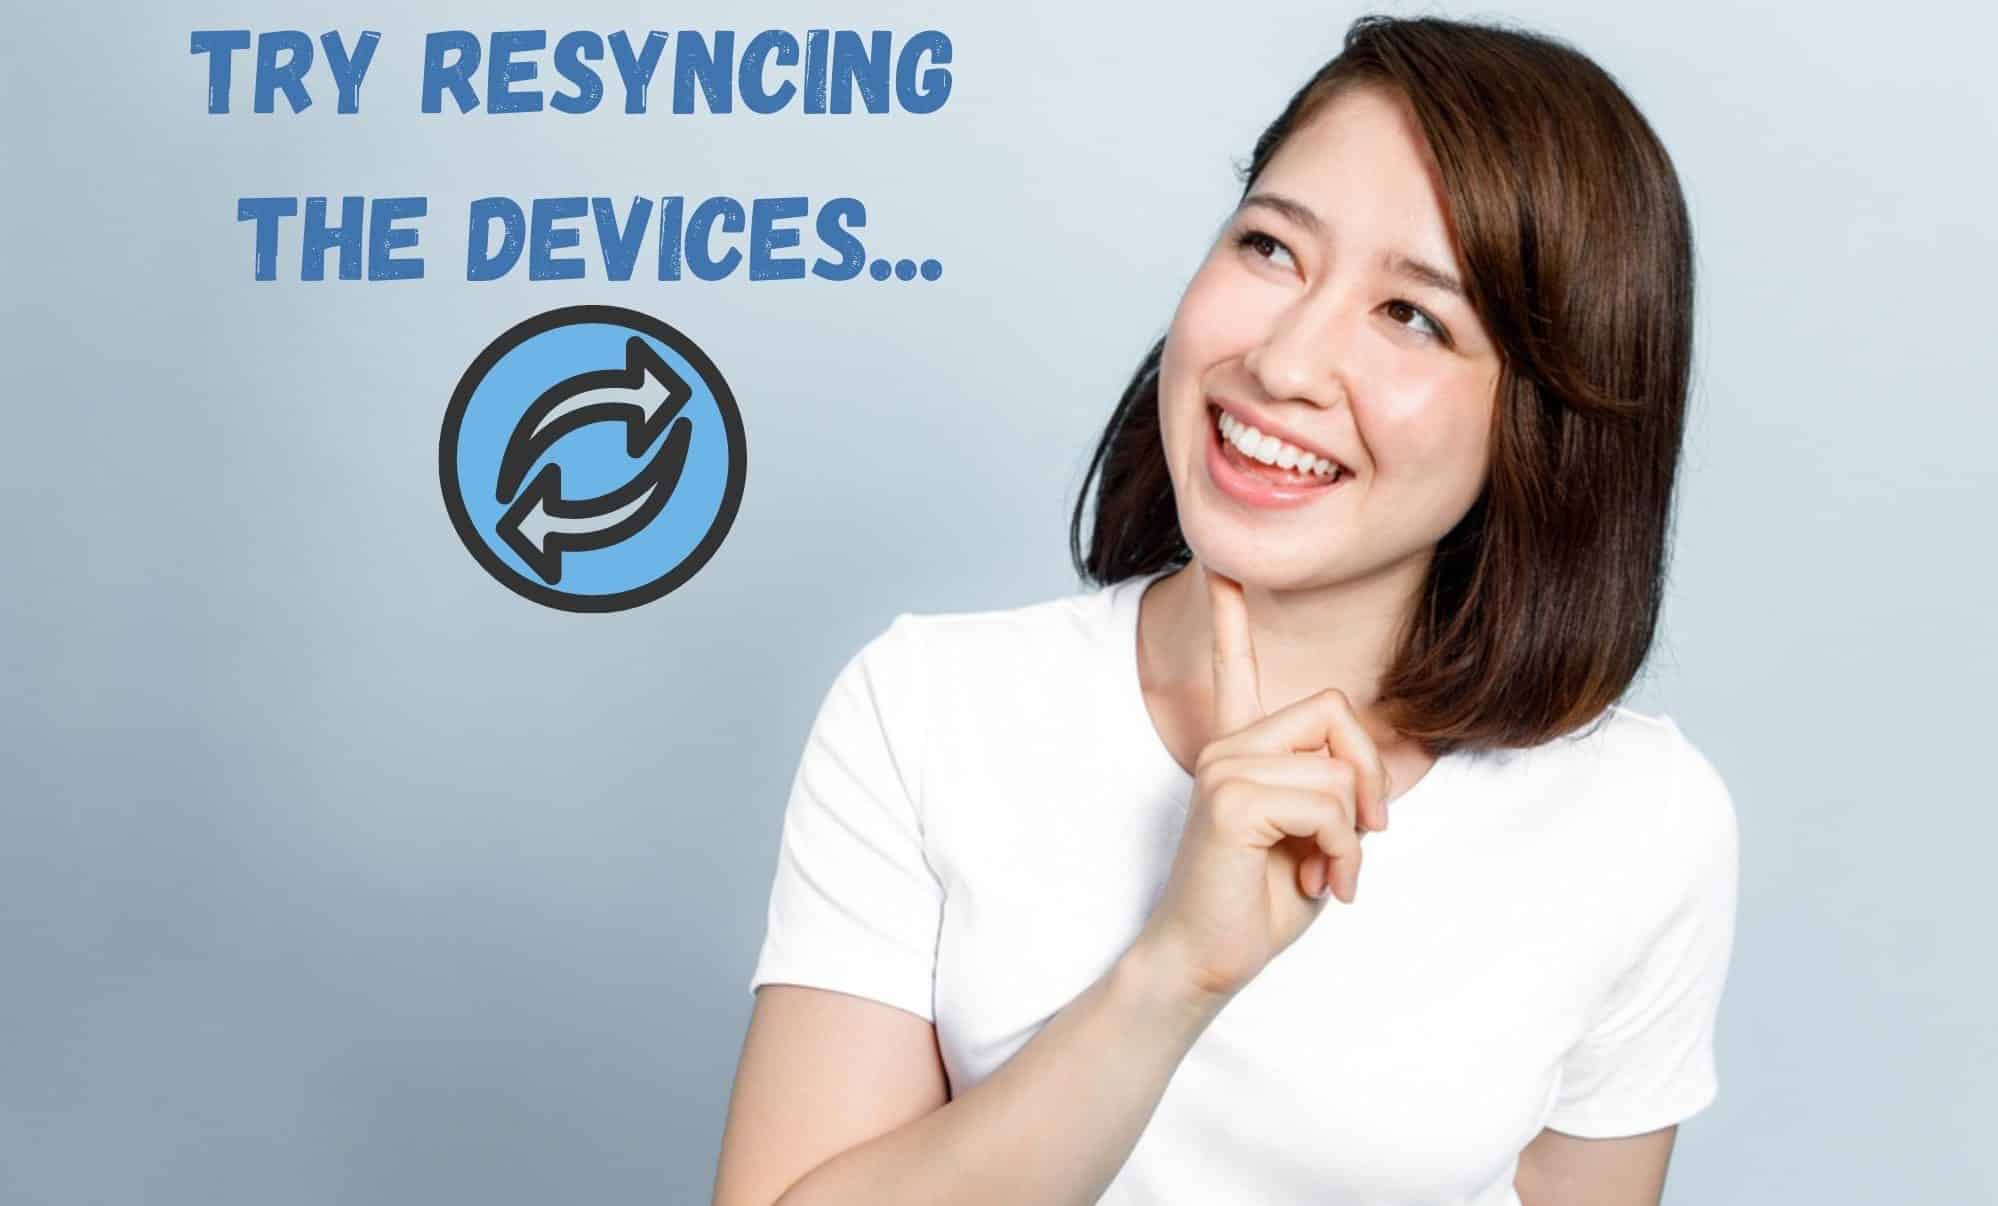 Try resyncing the devices